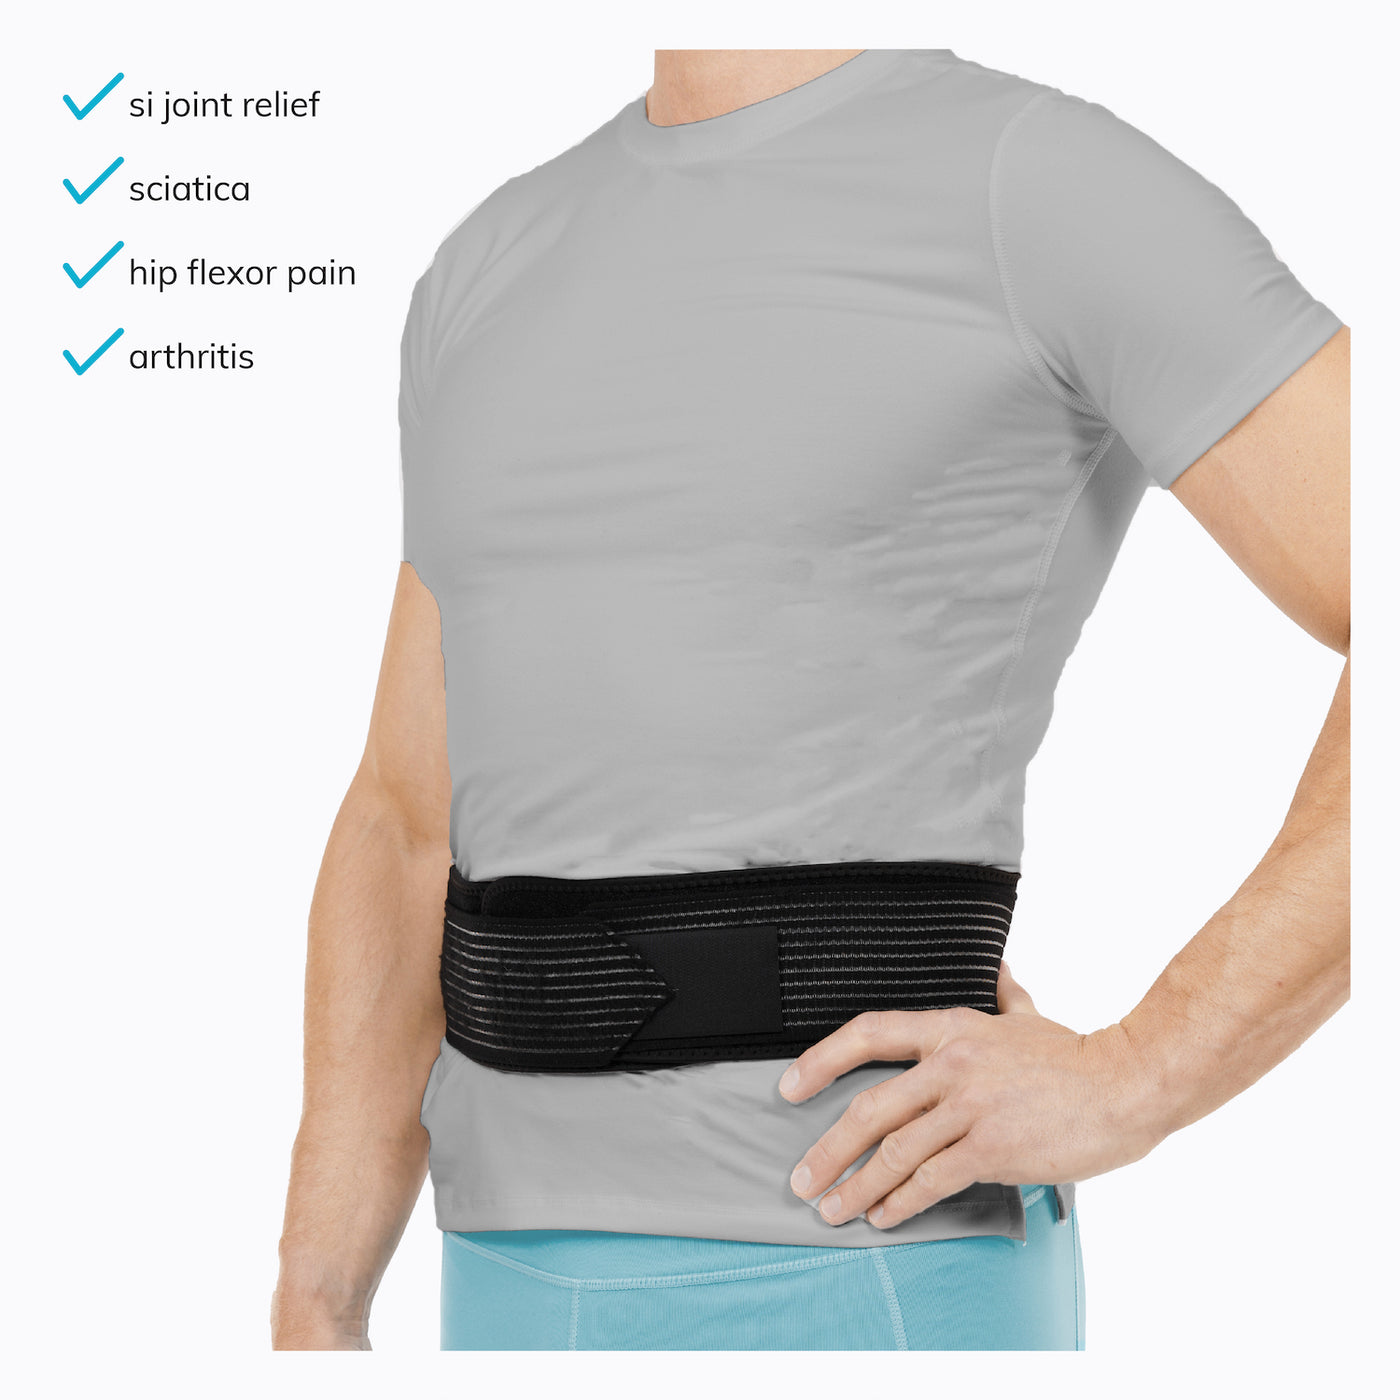 The sacroiliac joint pain brace also helps with sciatica, hip flexor pain, and arthritis